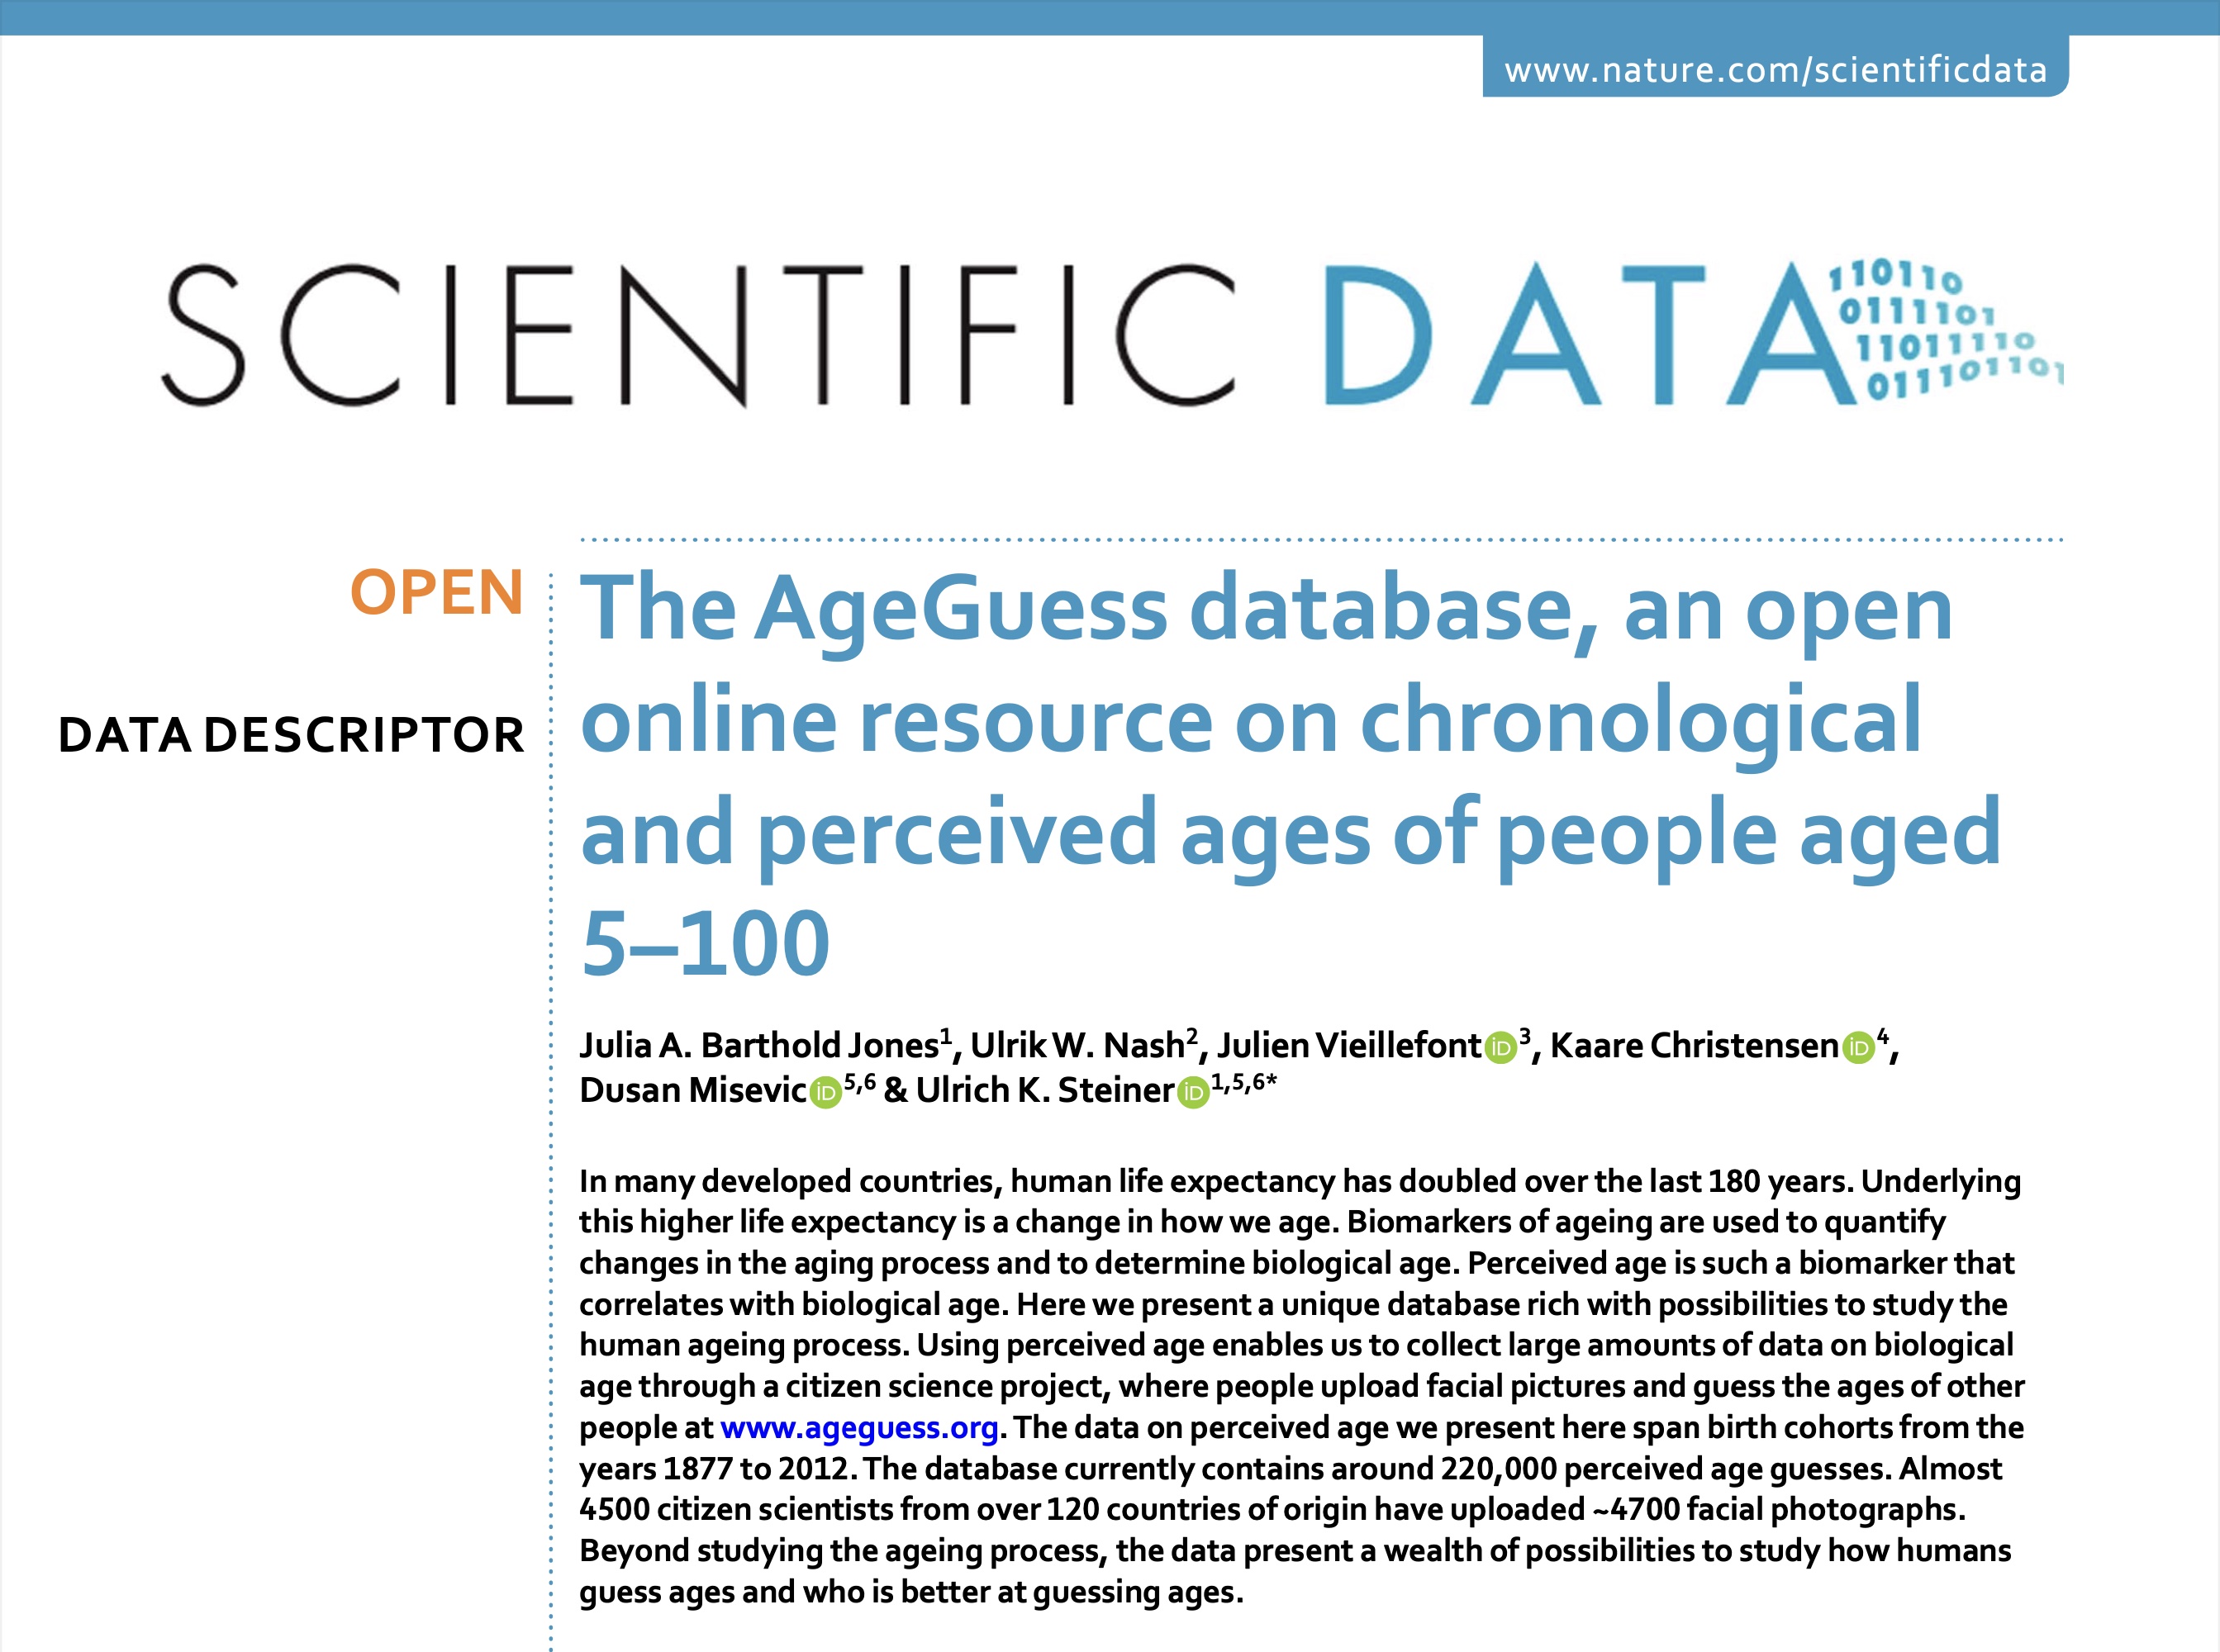 The AgeGuess database